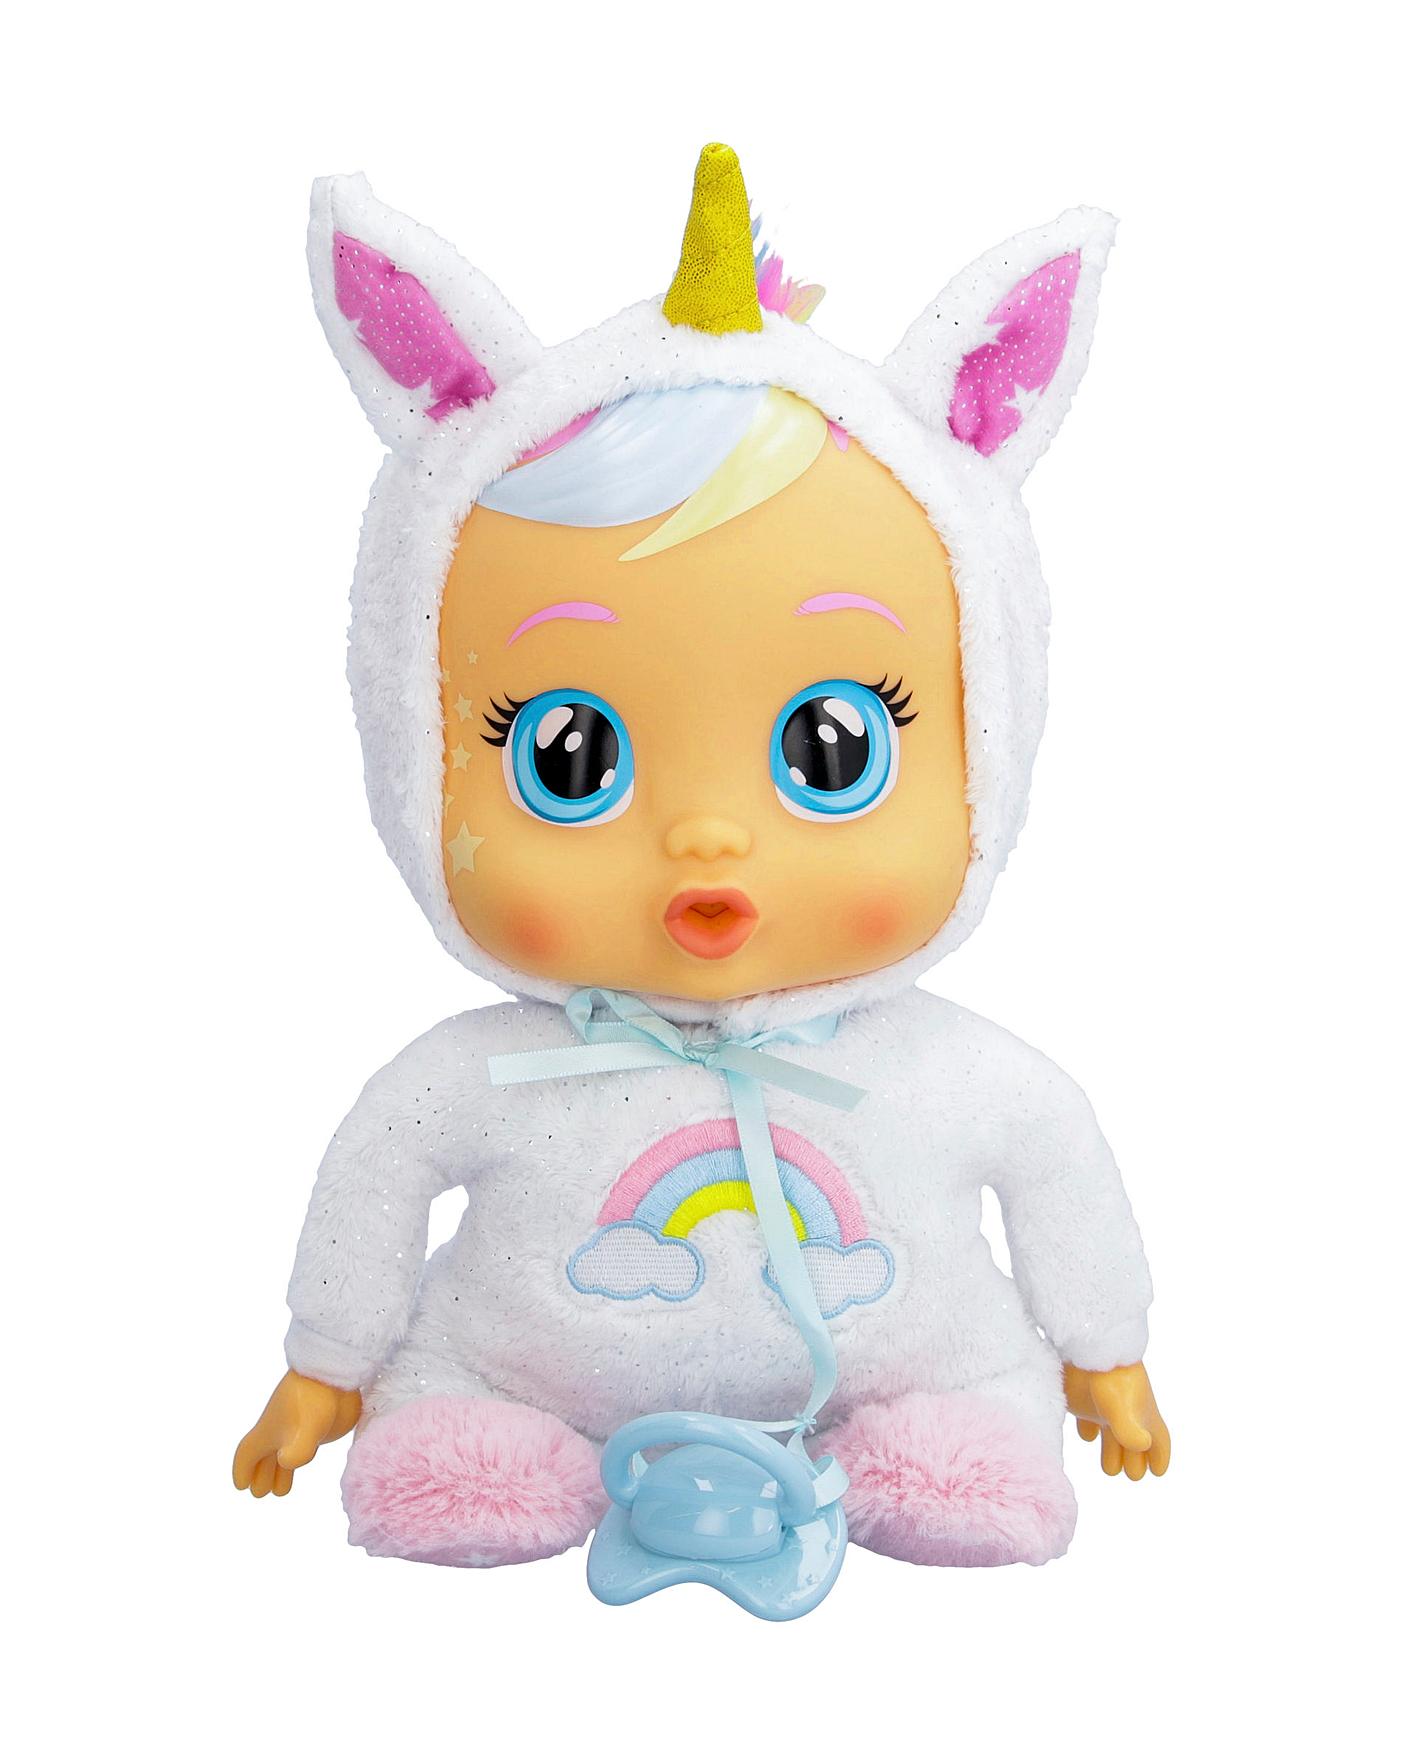 Crybabies' Dolls are the Gateway to a Nightmarish Hellscape